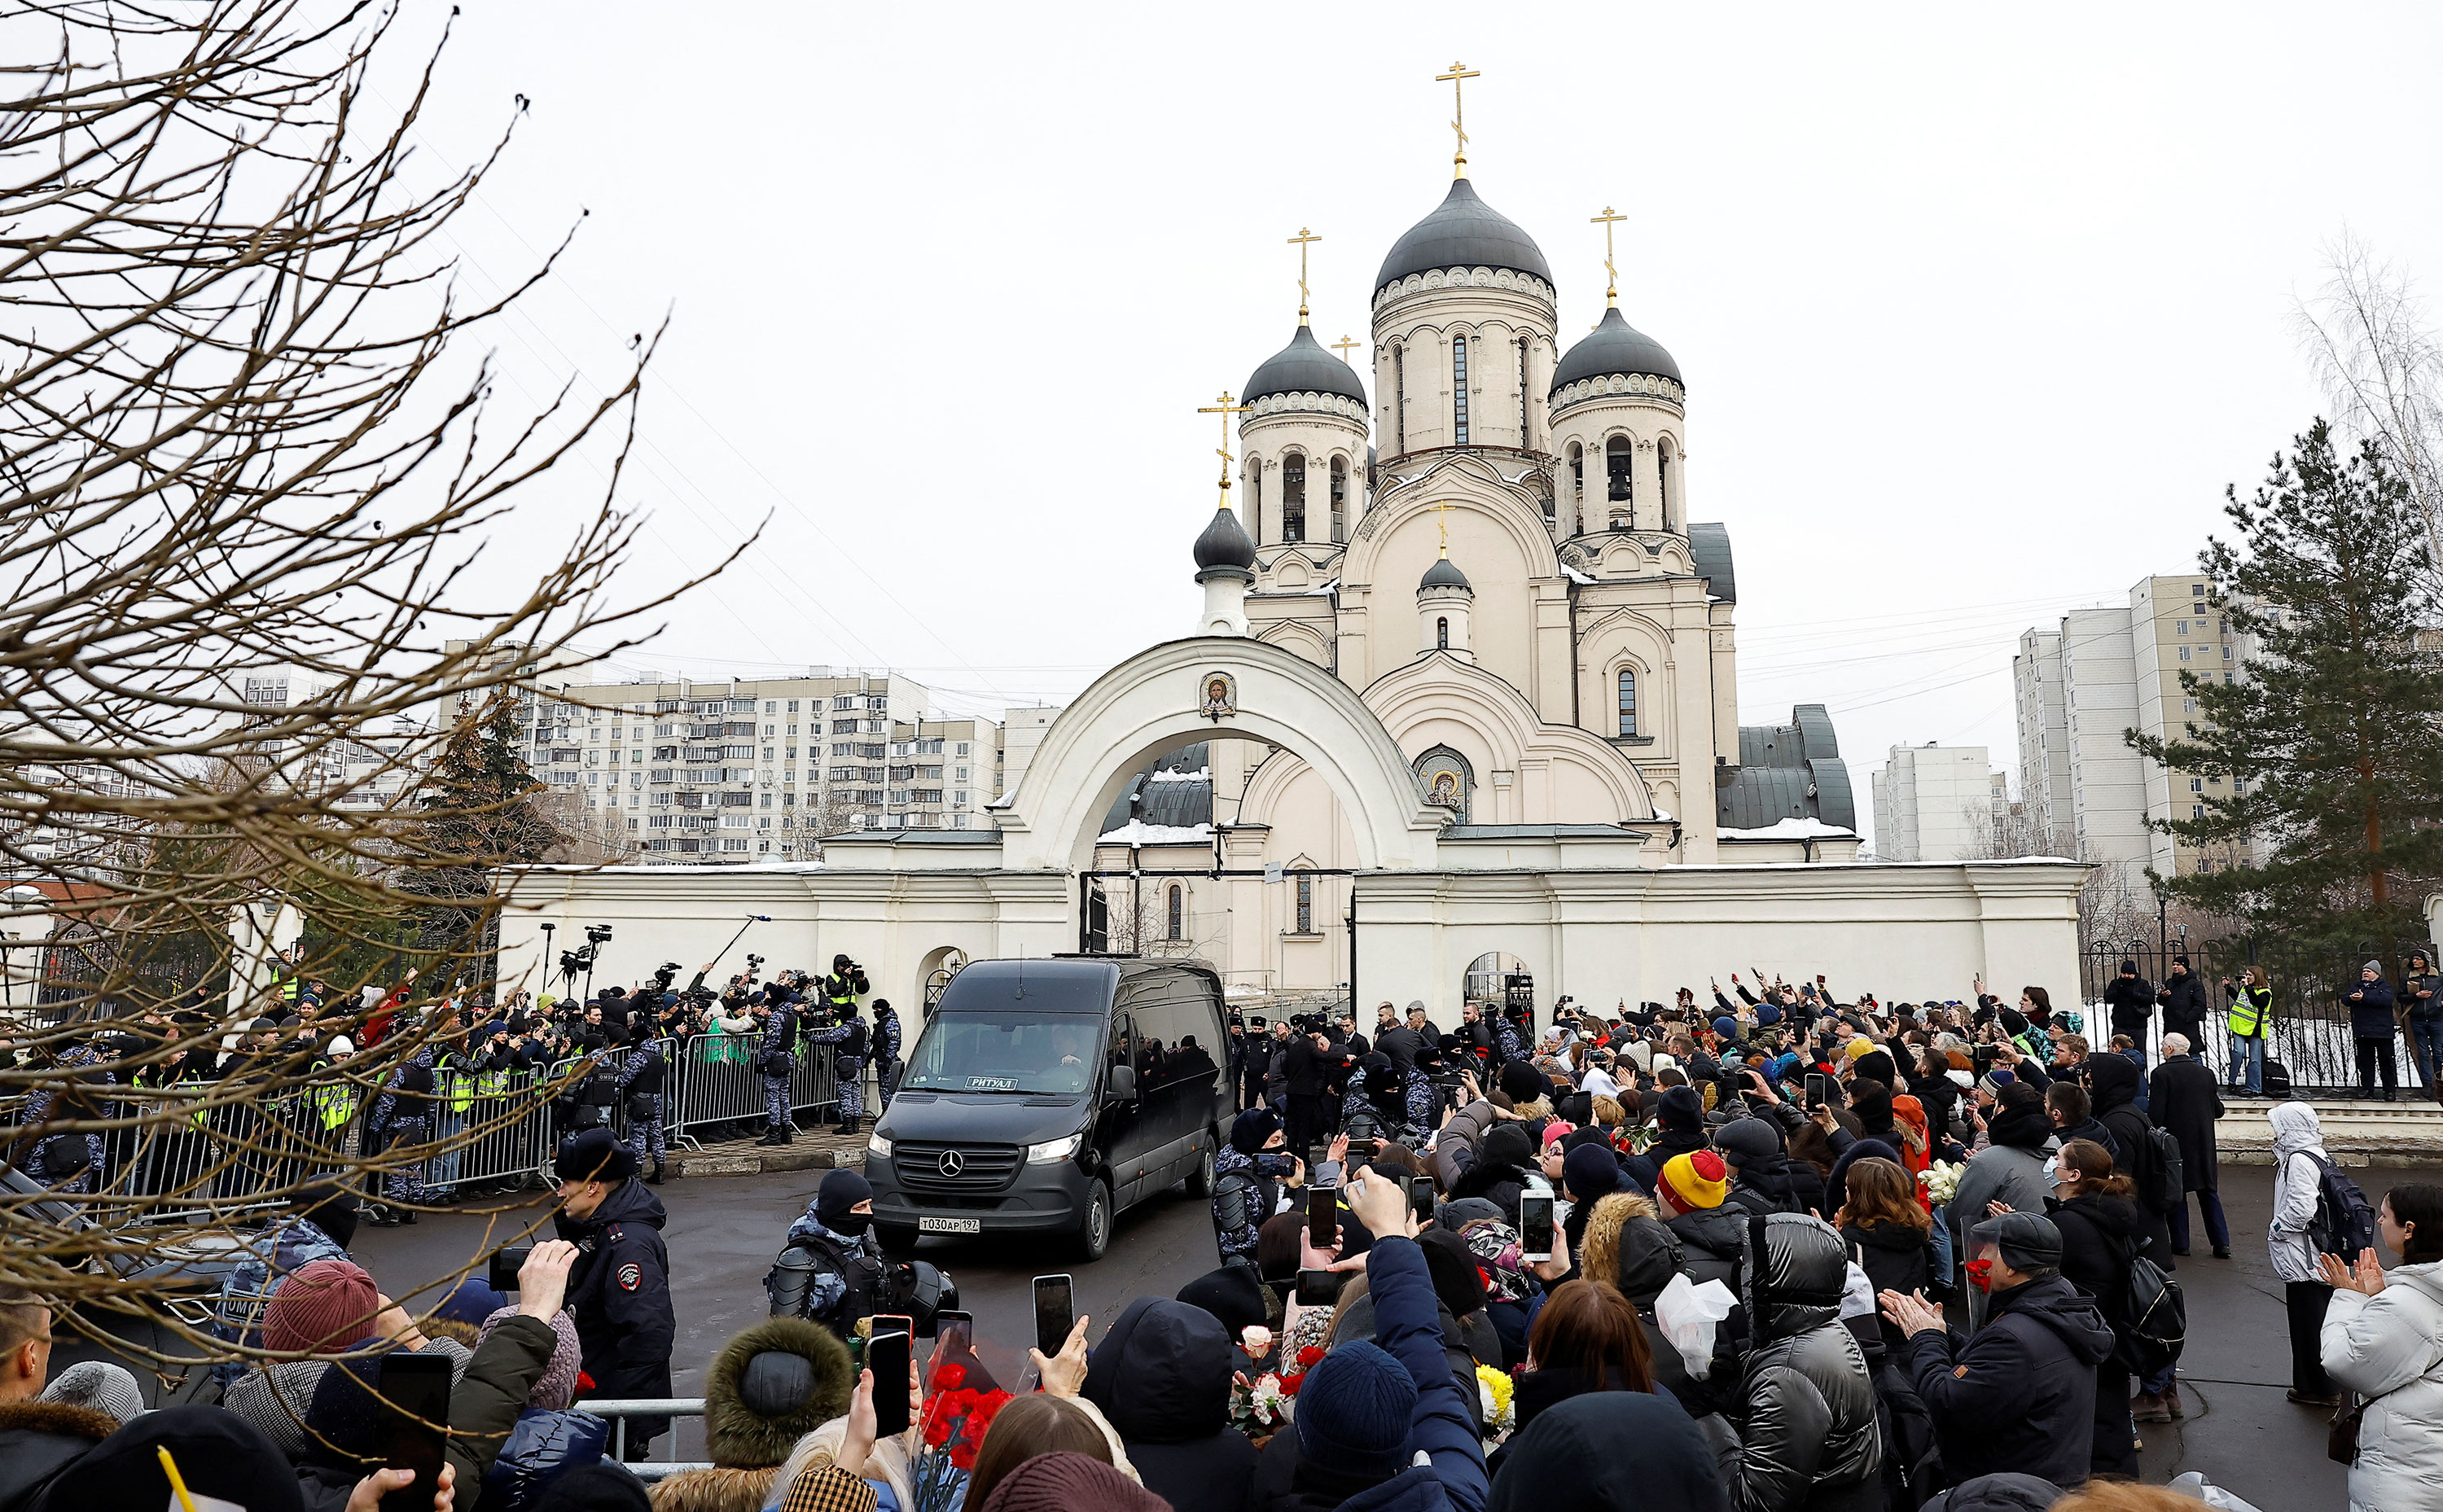 The hearse carrying Alexey Navalny's casket is parked outside the Church of the Icon of the Mother of God 'Quench My Sorrows' in Moscow before the funeral service on Friday.